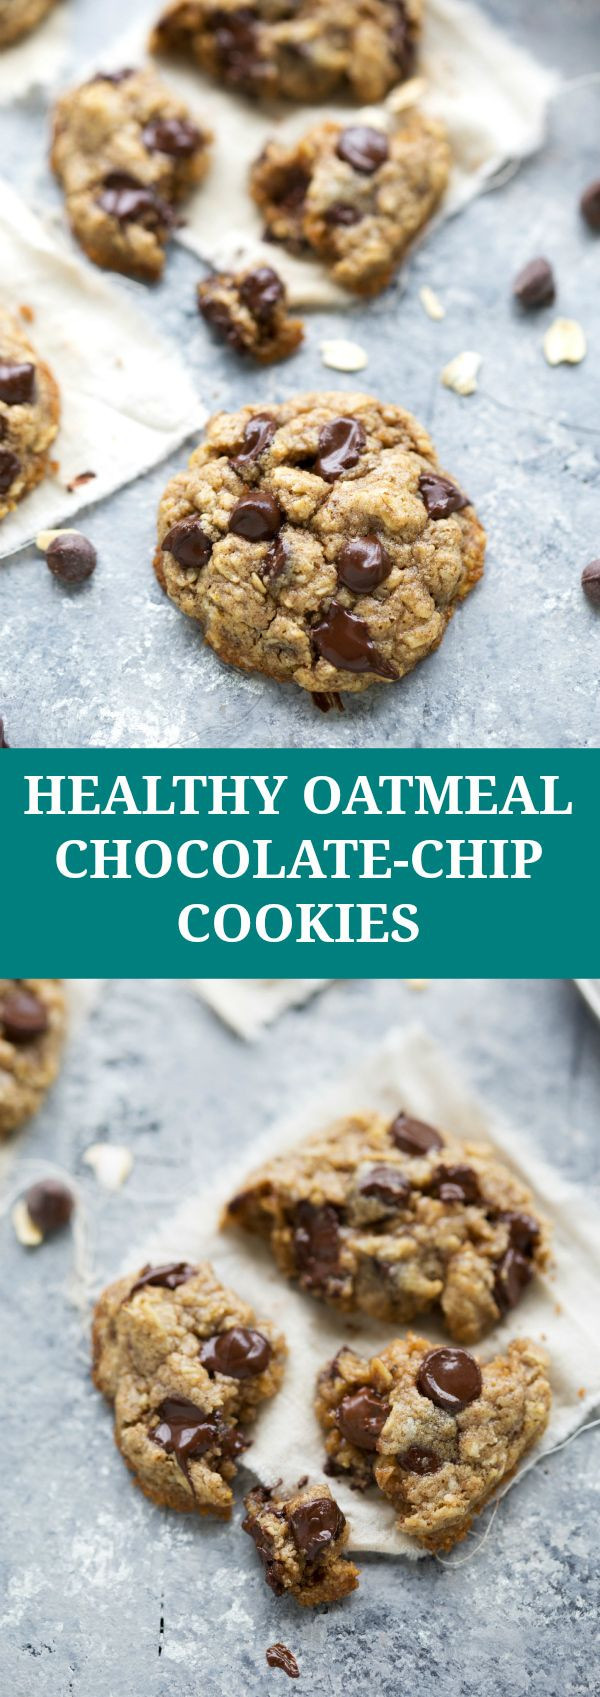 Healthy Oatmeal Chocolate Chip Cookies | Chelsea's...